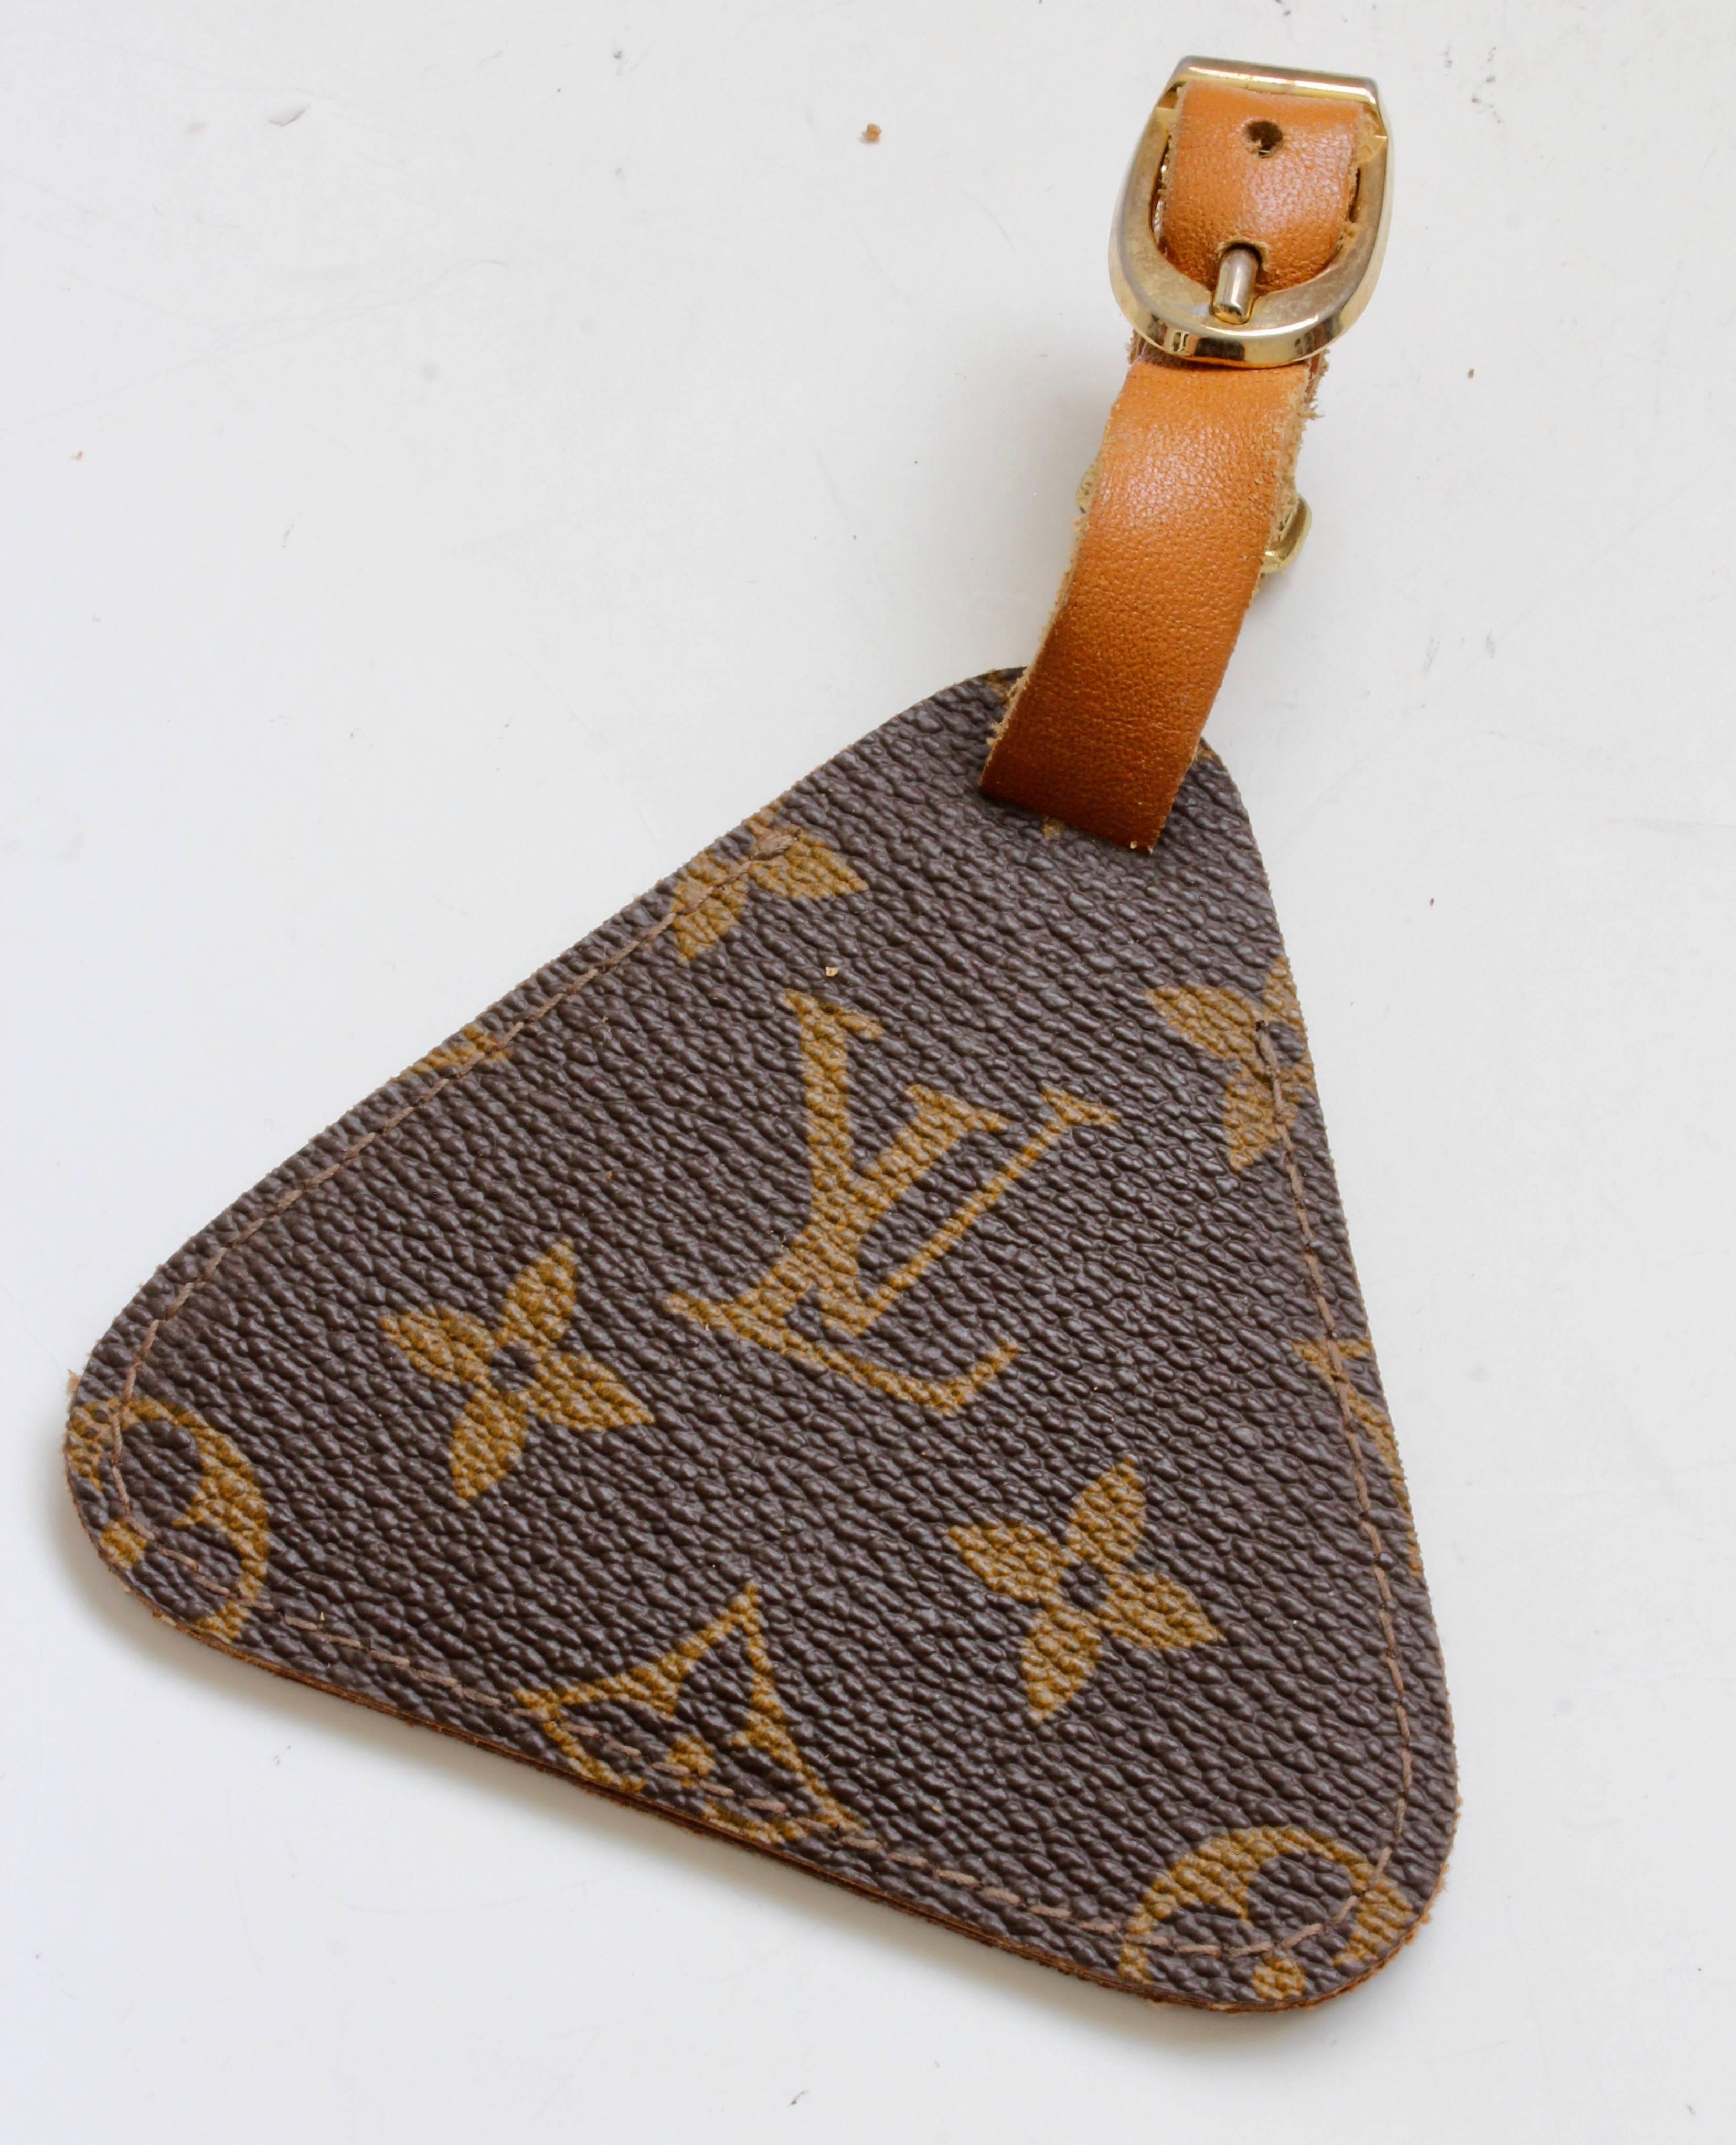 Here's a hard to find luggage tag made in the 1970s by The French Company under special license from Louis Vuitton.  Made from their signature monogram canvas, it features a coated leather interior with clear ID window and a leather buckle strap. 